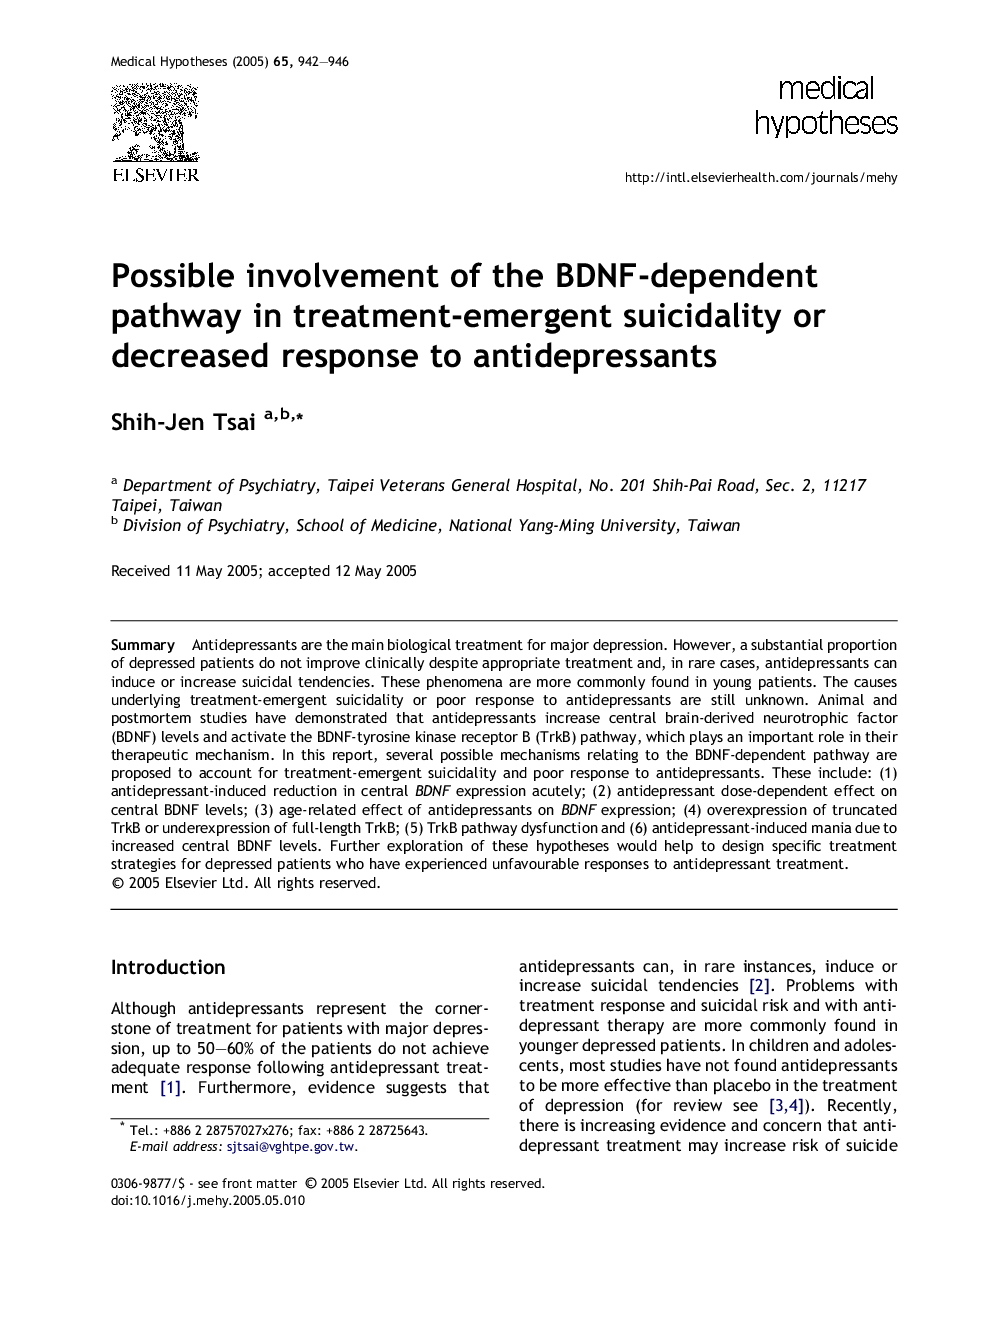 Possible involvement of the BDNF-dependent pathway in treatment-emergent suicidality or decreased response to antidepressants